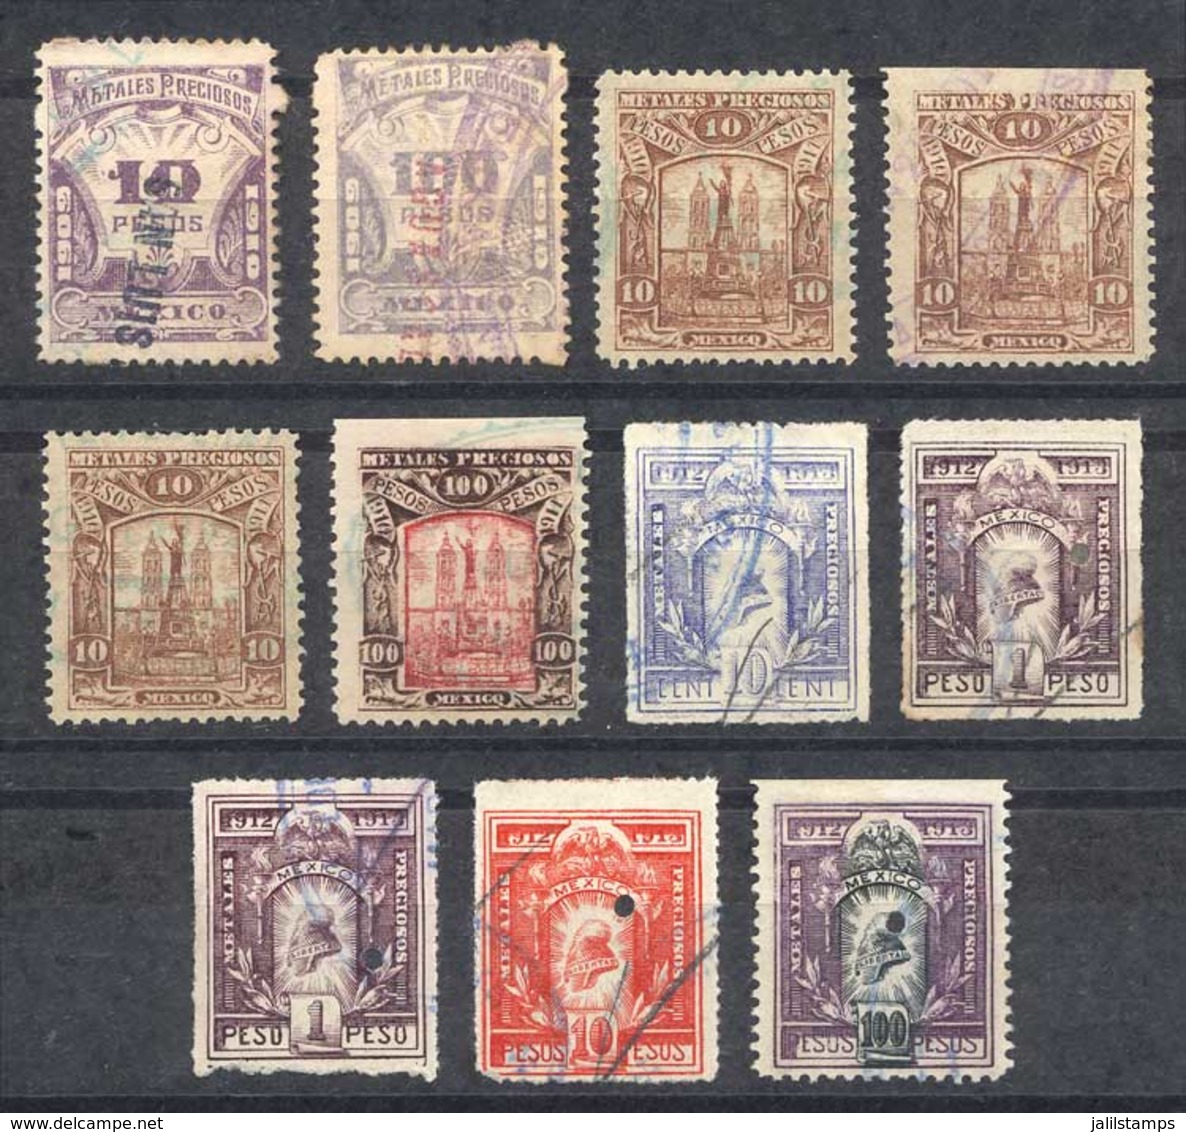 MEXICO: PRECIOUS METALS: Years 1909/12, 11 Stamps Between 10c. And $100, Fine General Quality, Rare! - Mexiko